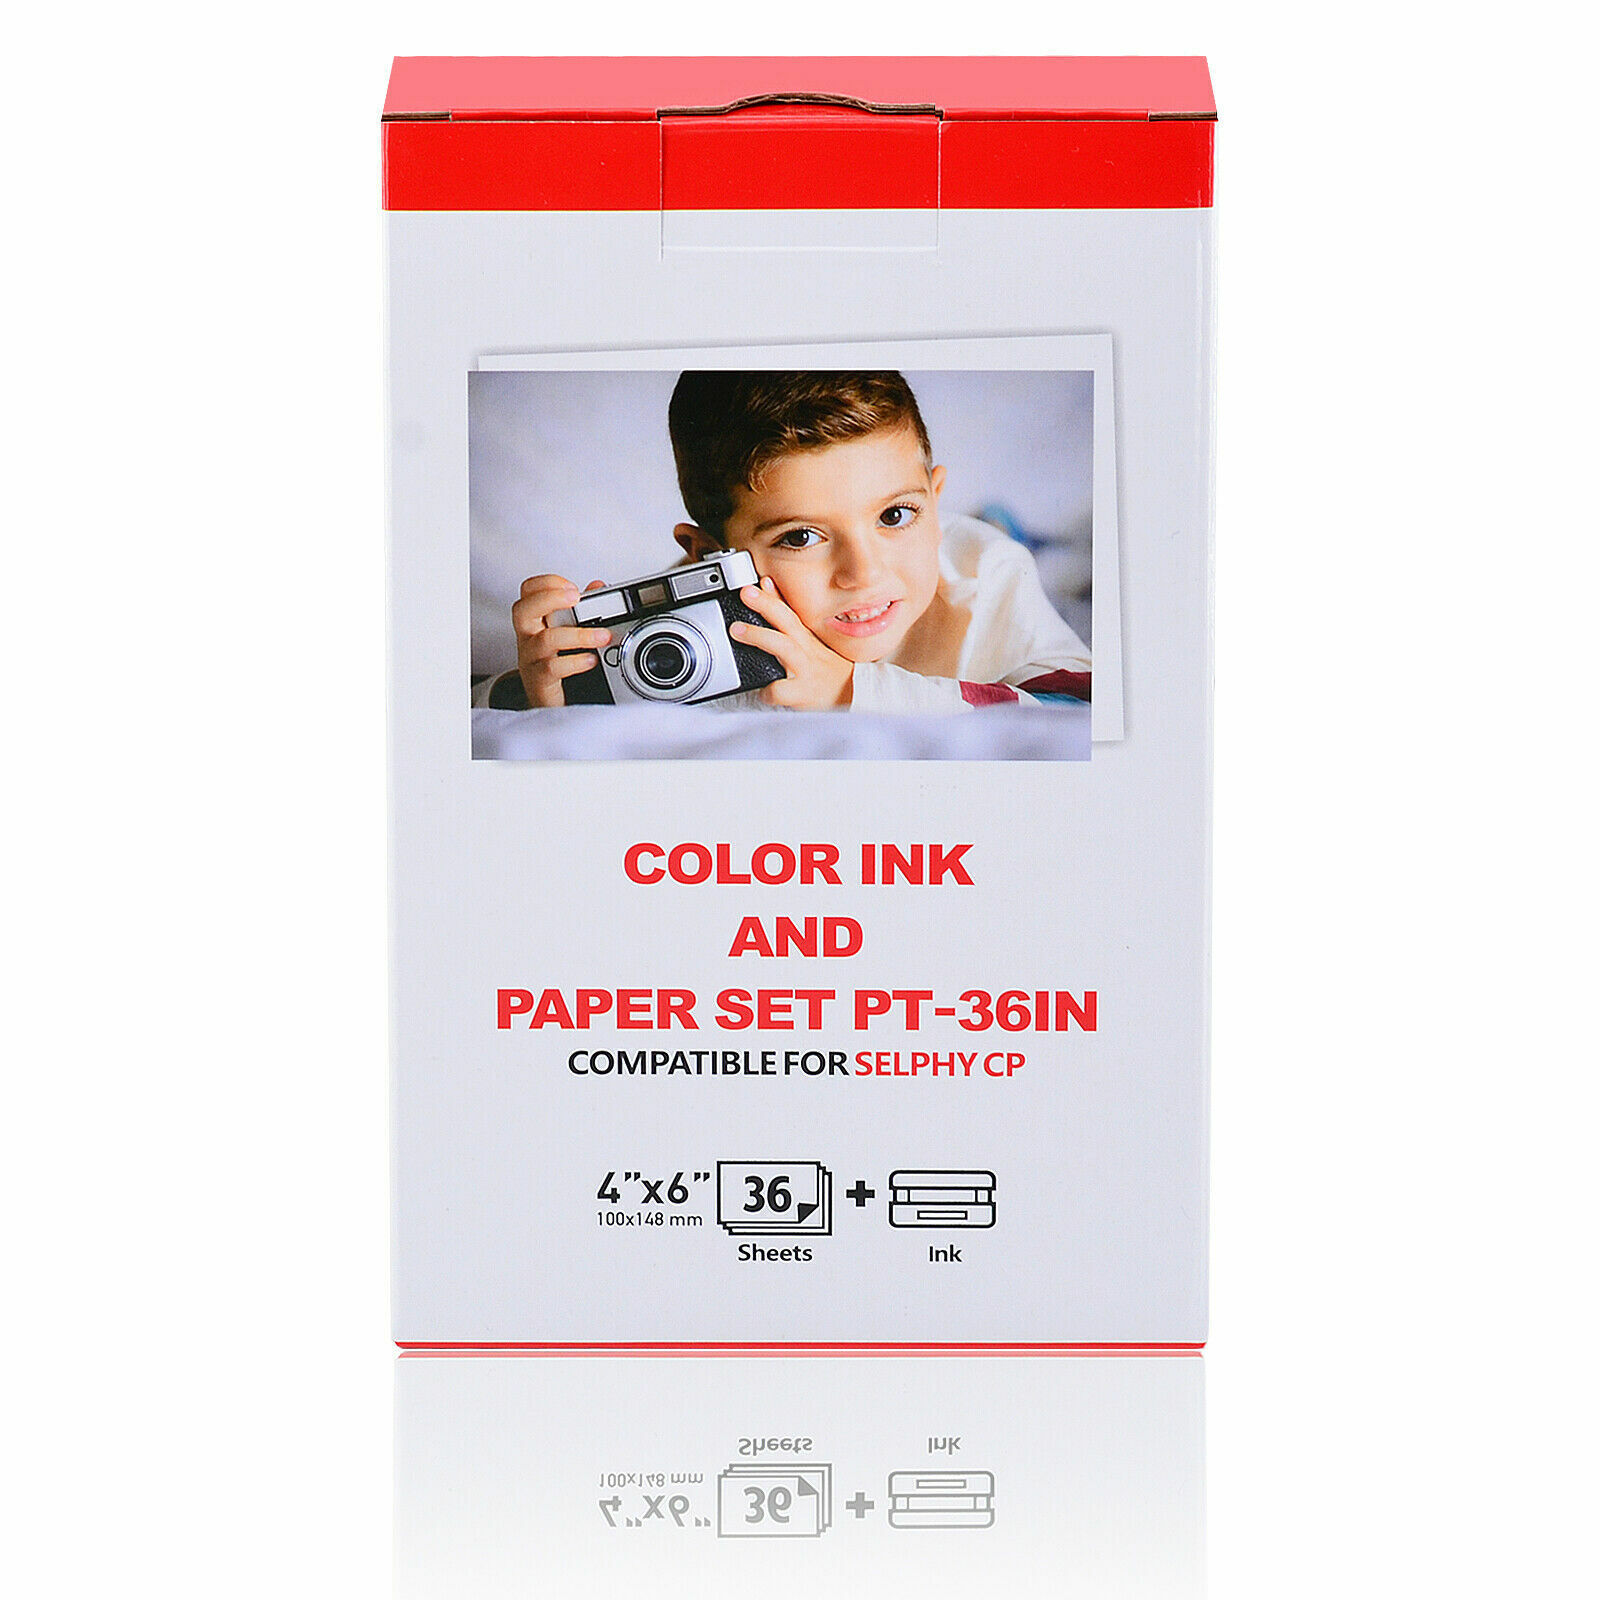 Fits Canon Selphy CP-760 CP770 Color Ink 36 Sheets 4x6in Photo Paper KP-36IP Set